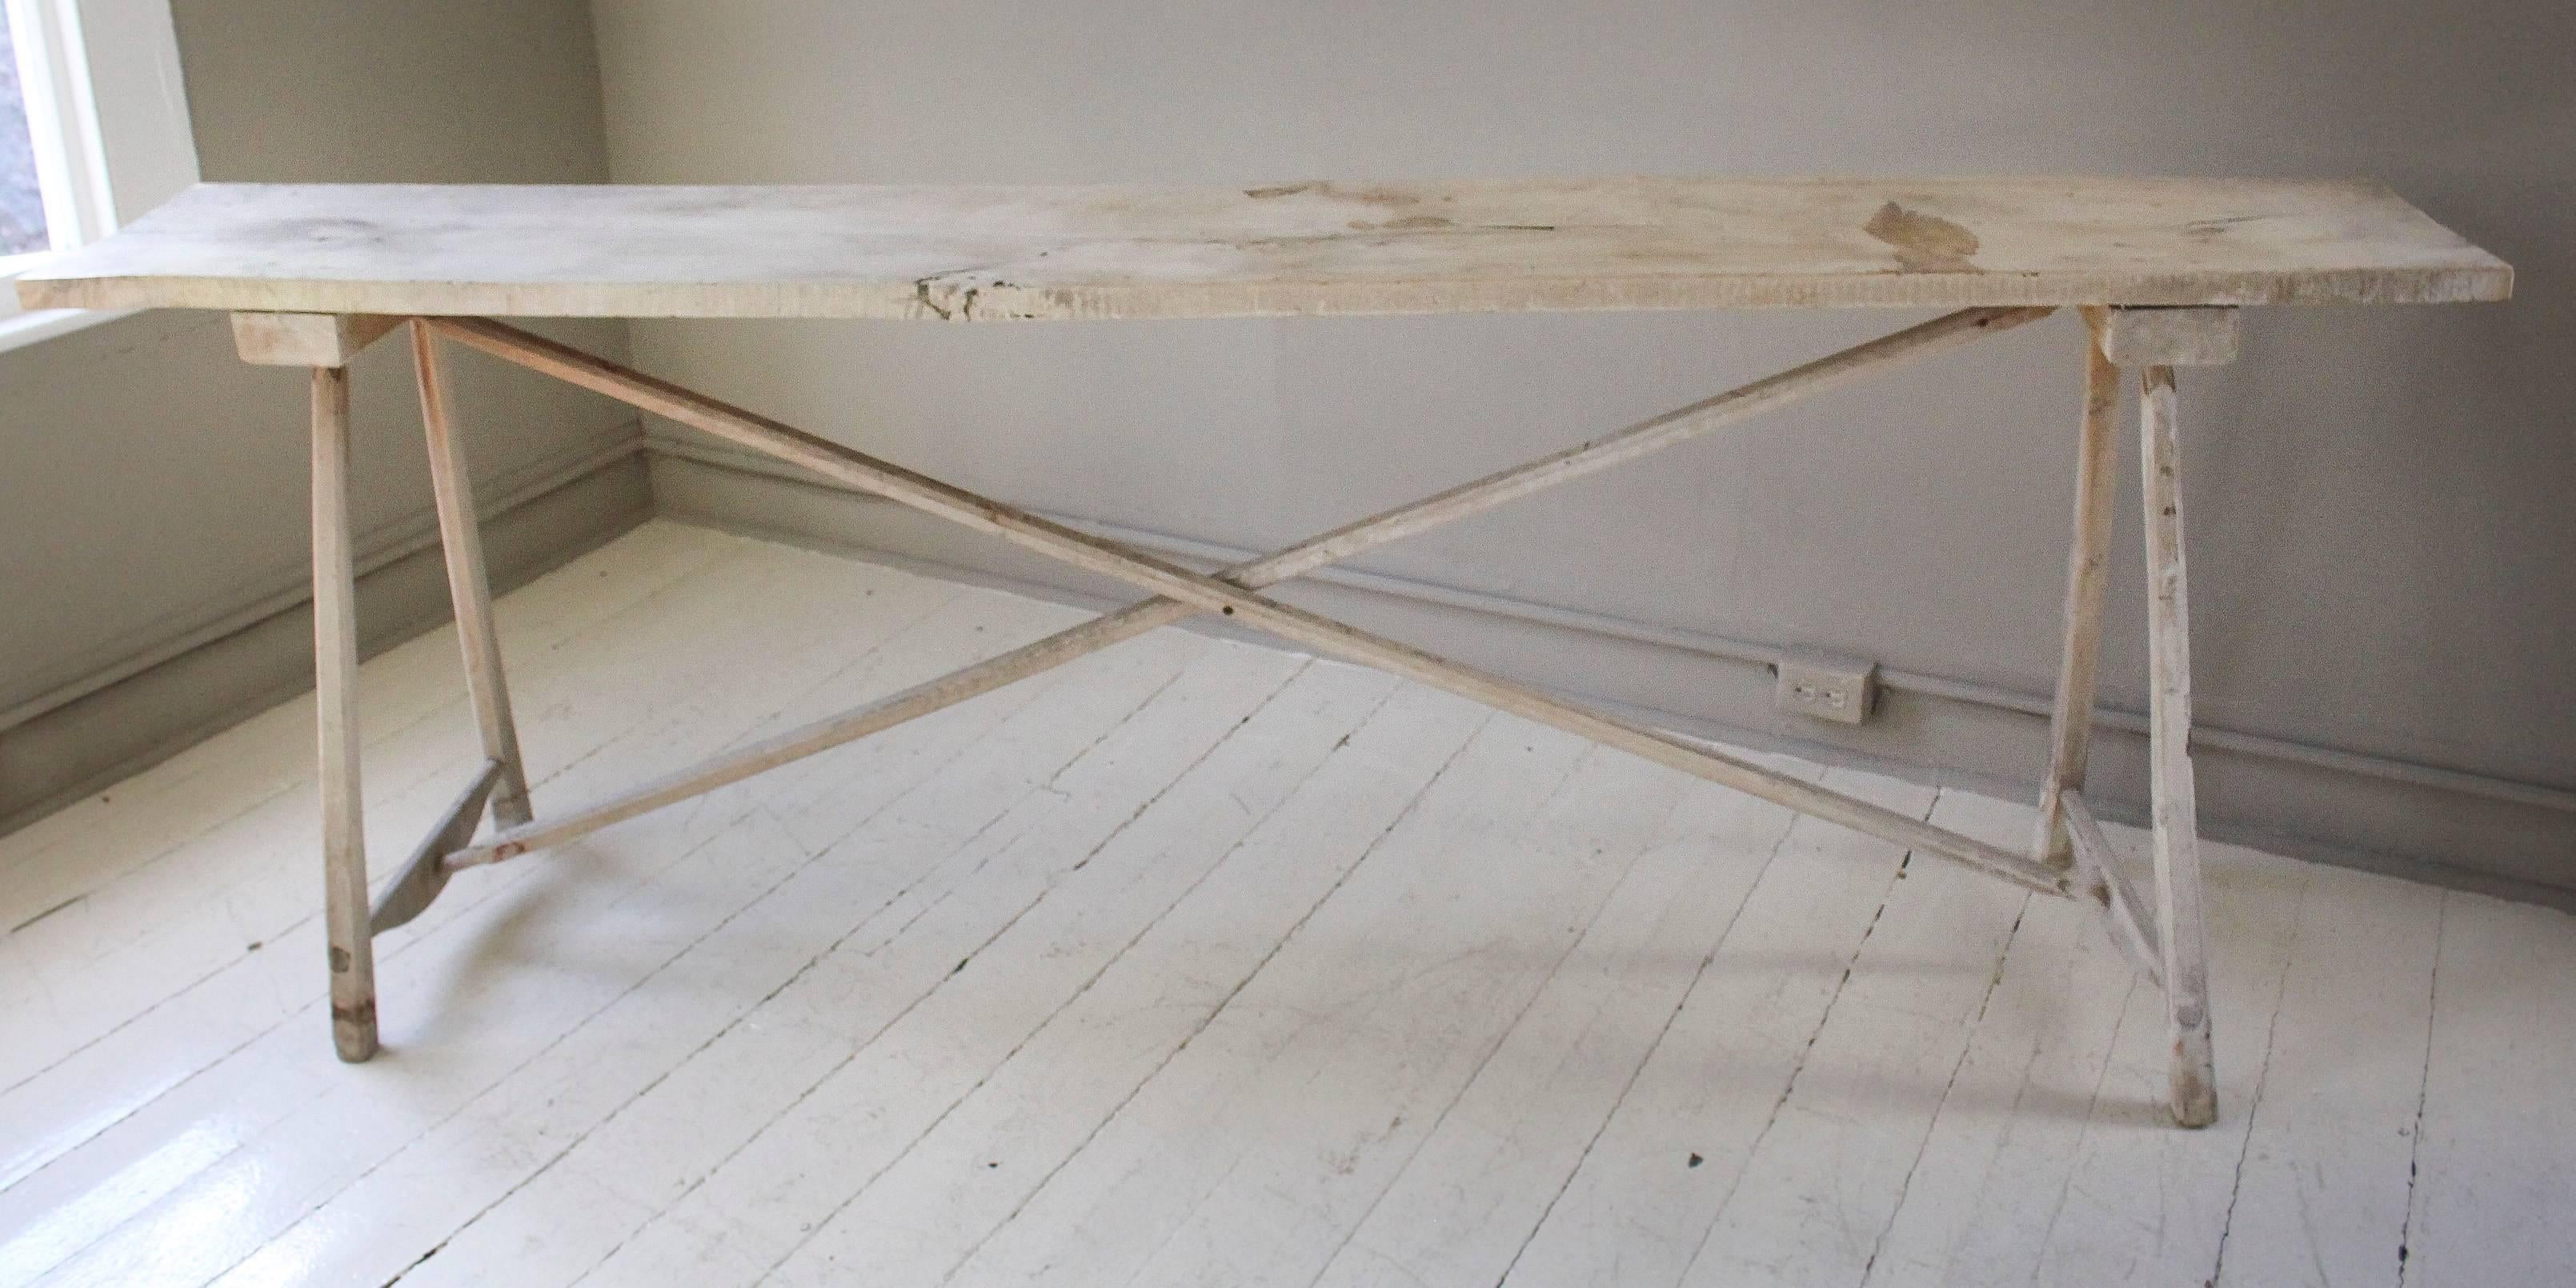 Belgian 20th century bleached wood console table with distinctive X-stretcher base.